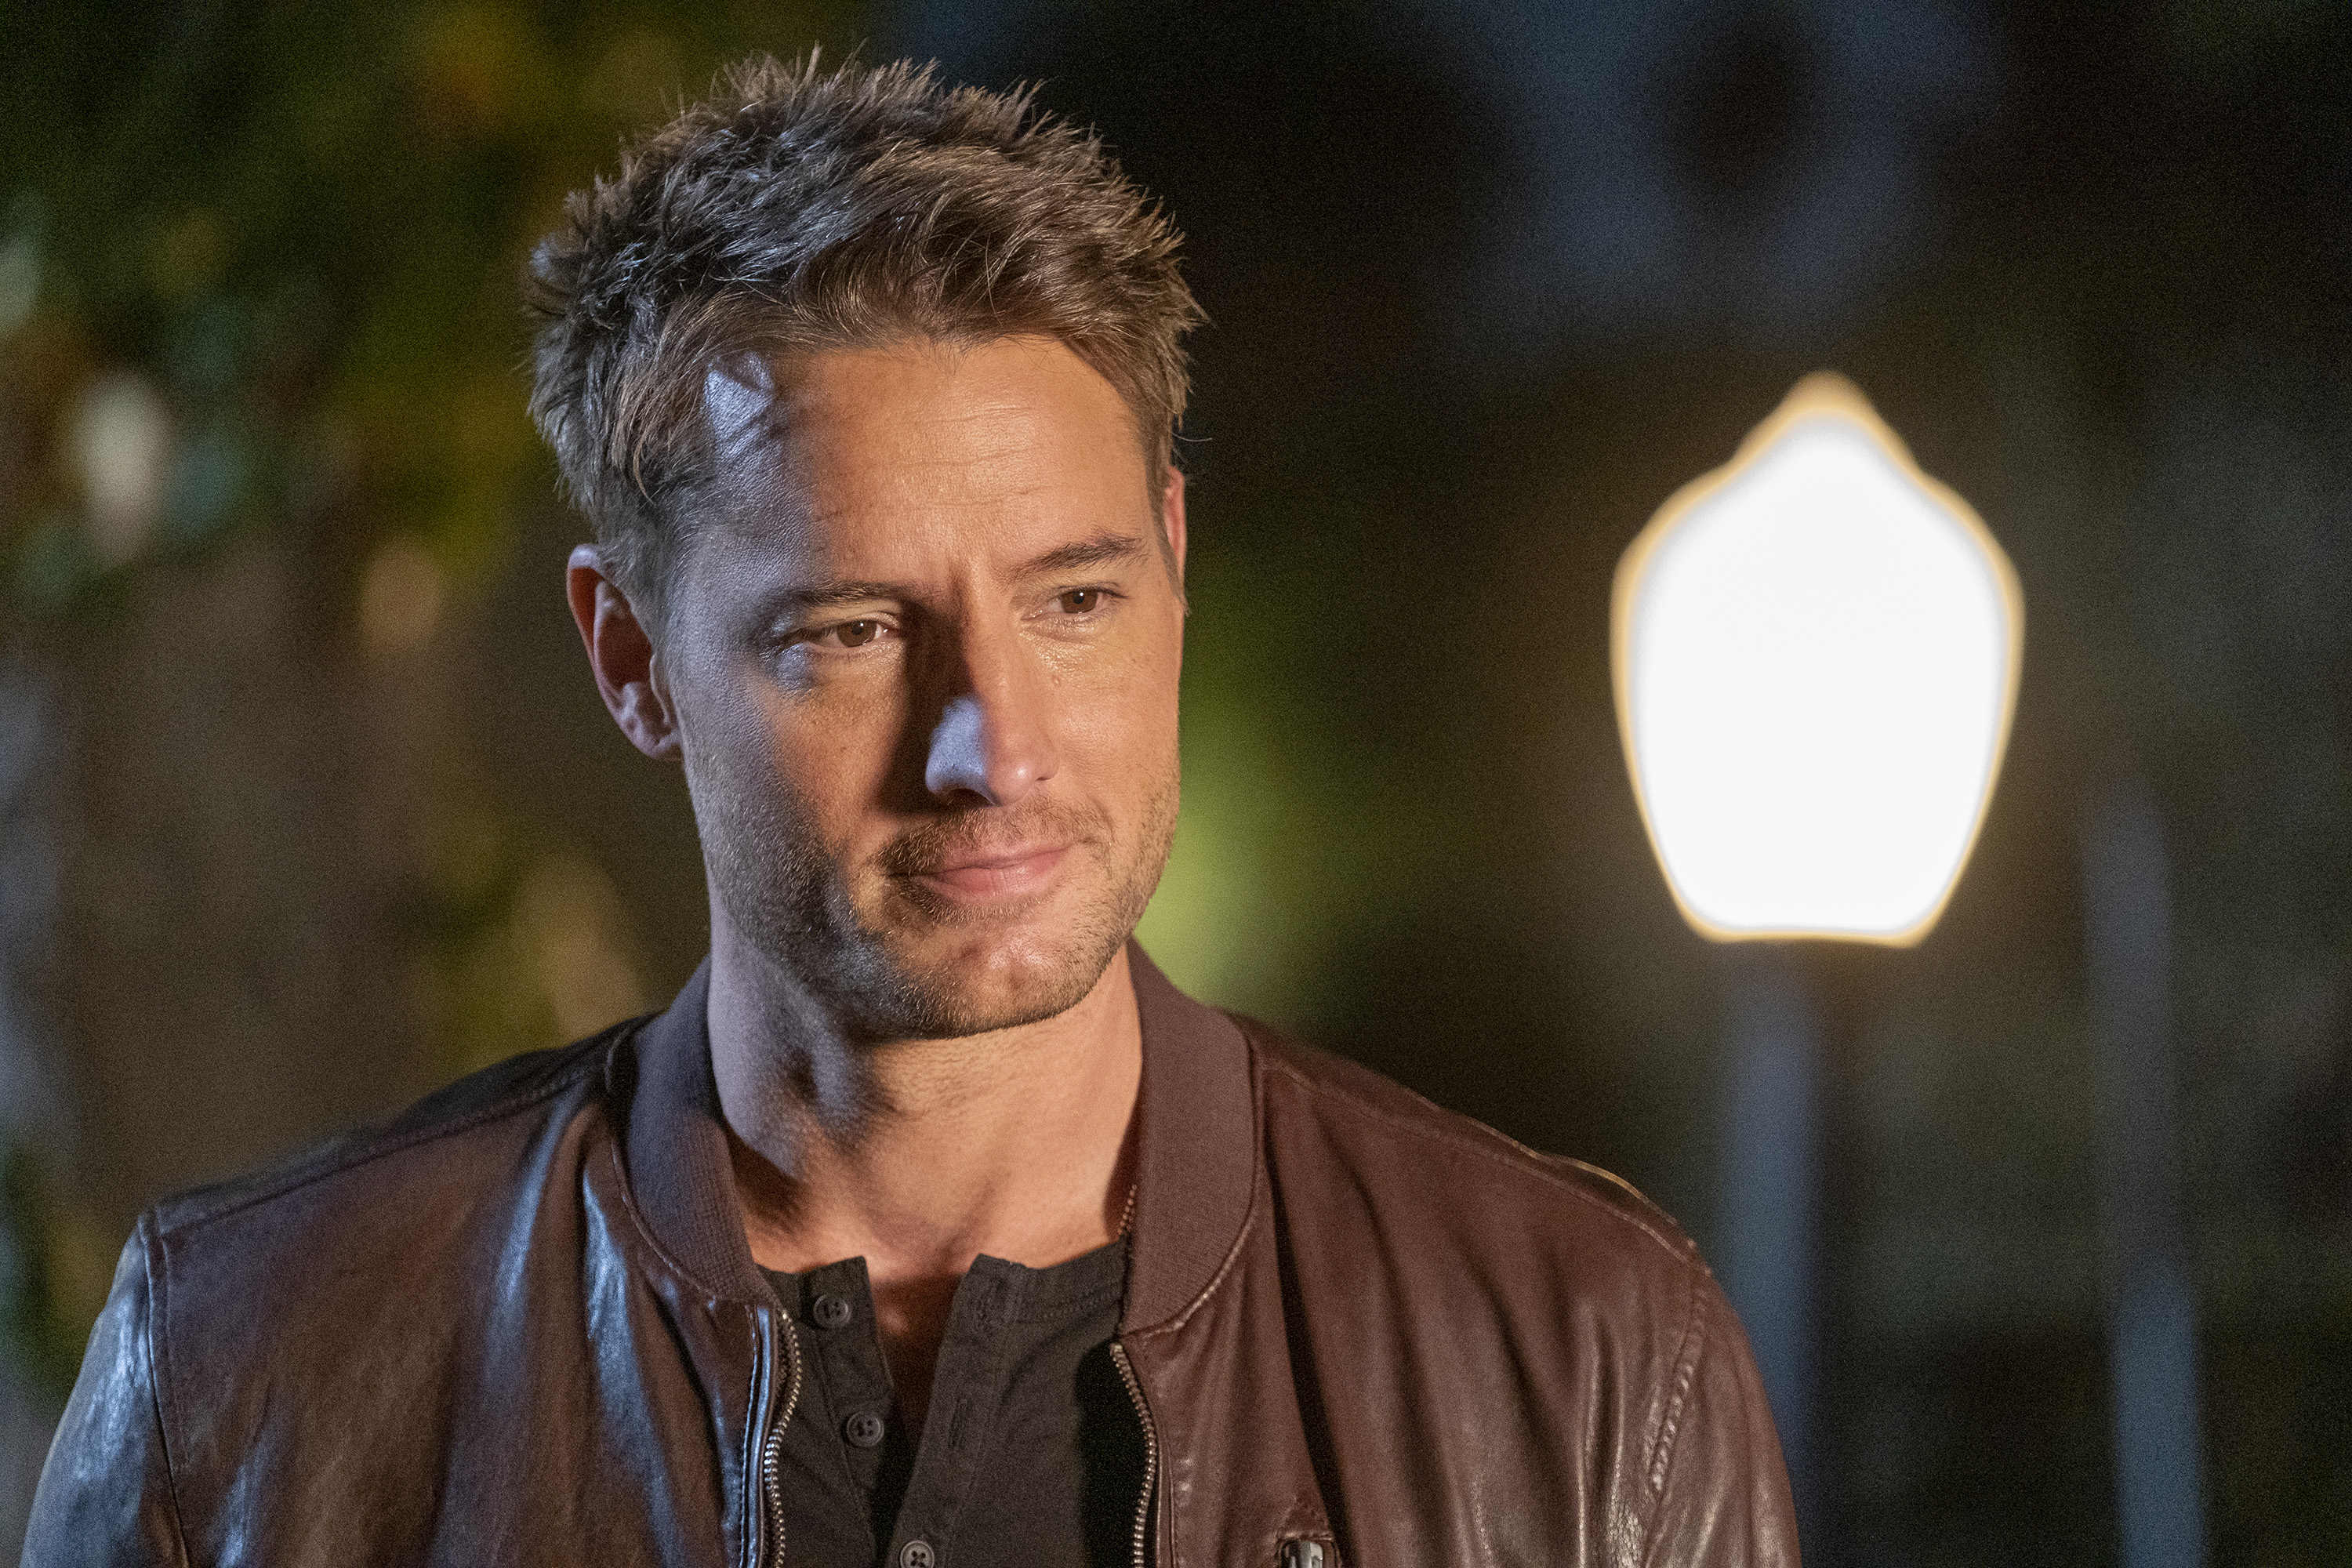 Justin Hartley, who plays Kevin in 'This Is Us,' wear a brown leather jacket over a black shirt.